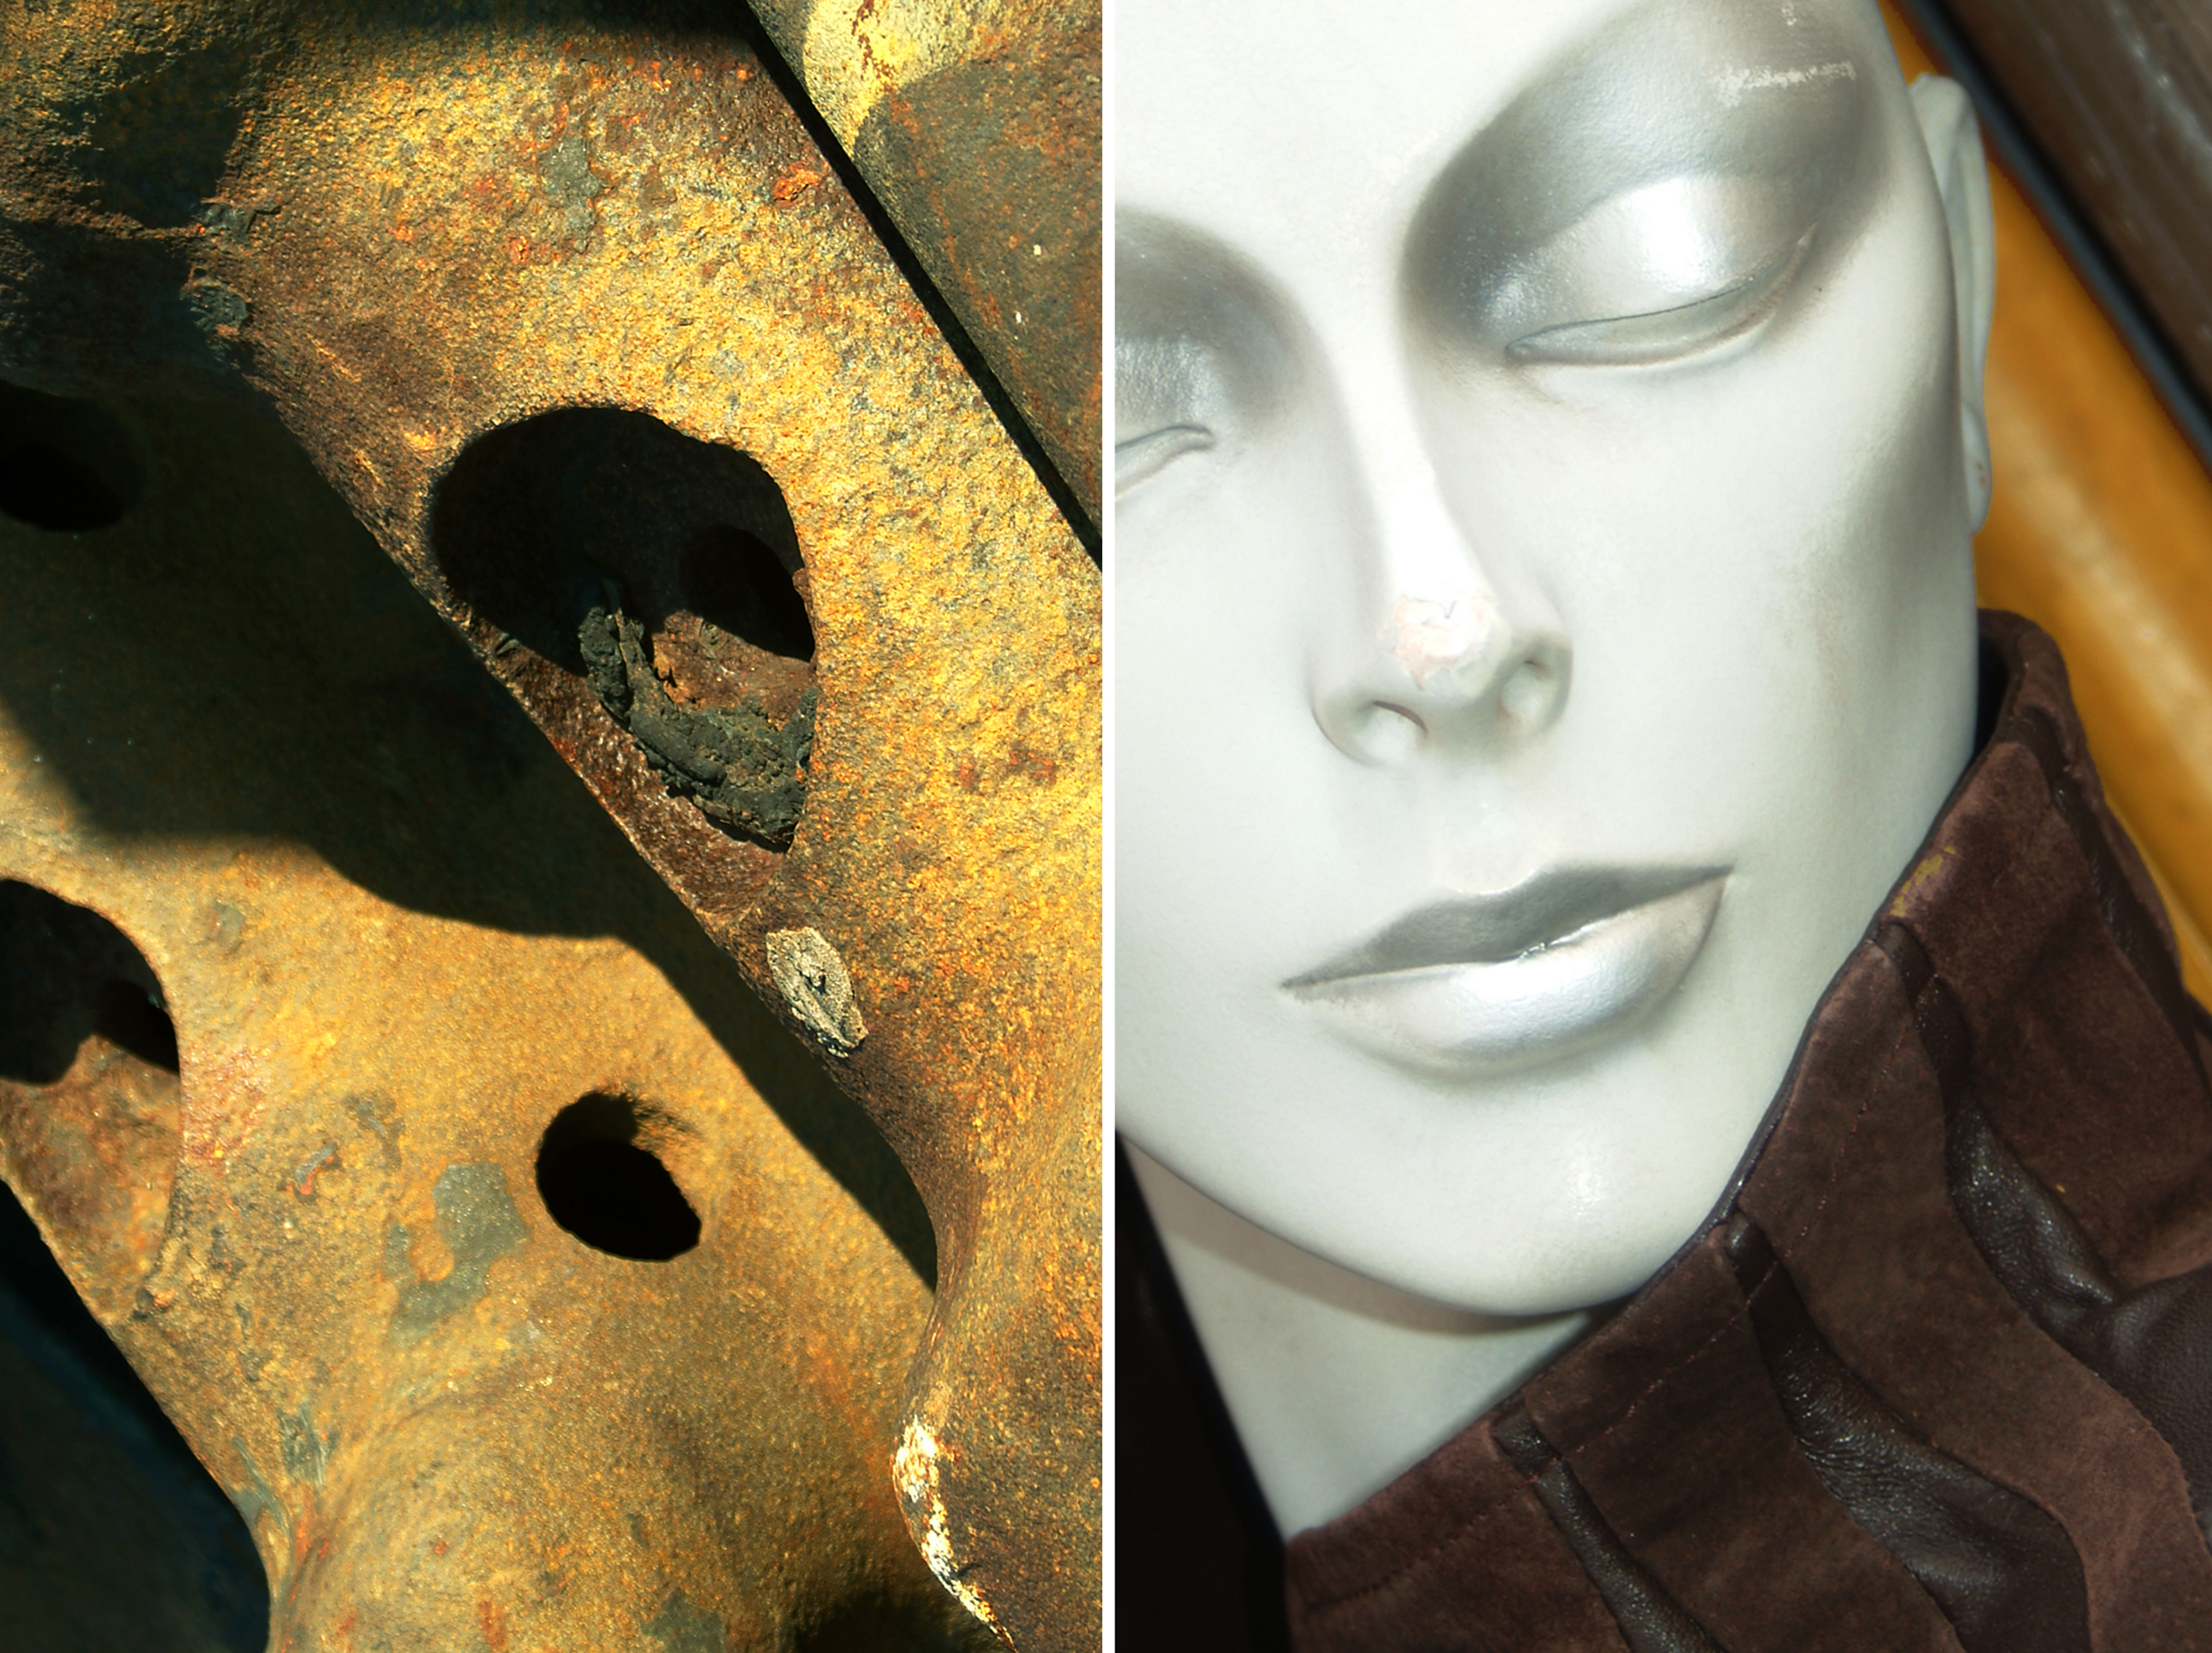 Diptych 27 brown jacket and rusted pipes.jpg